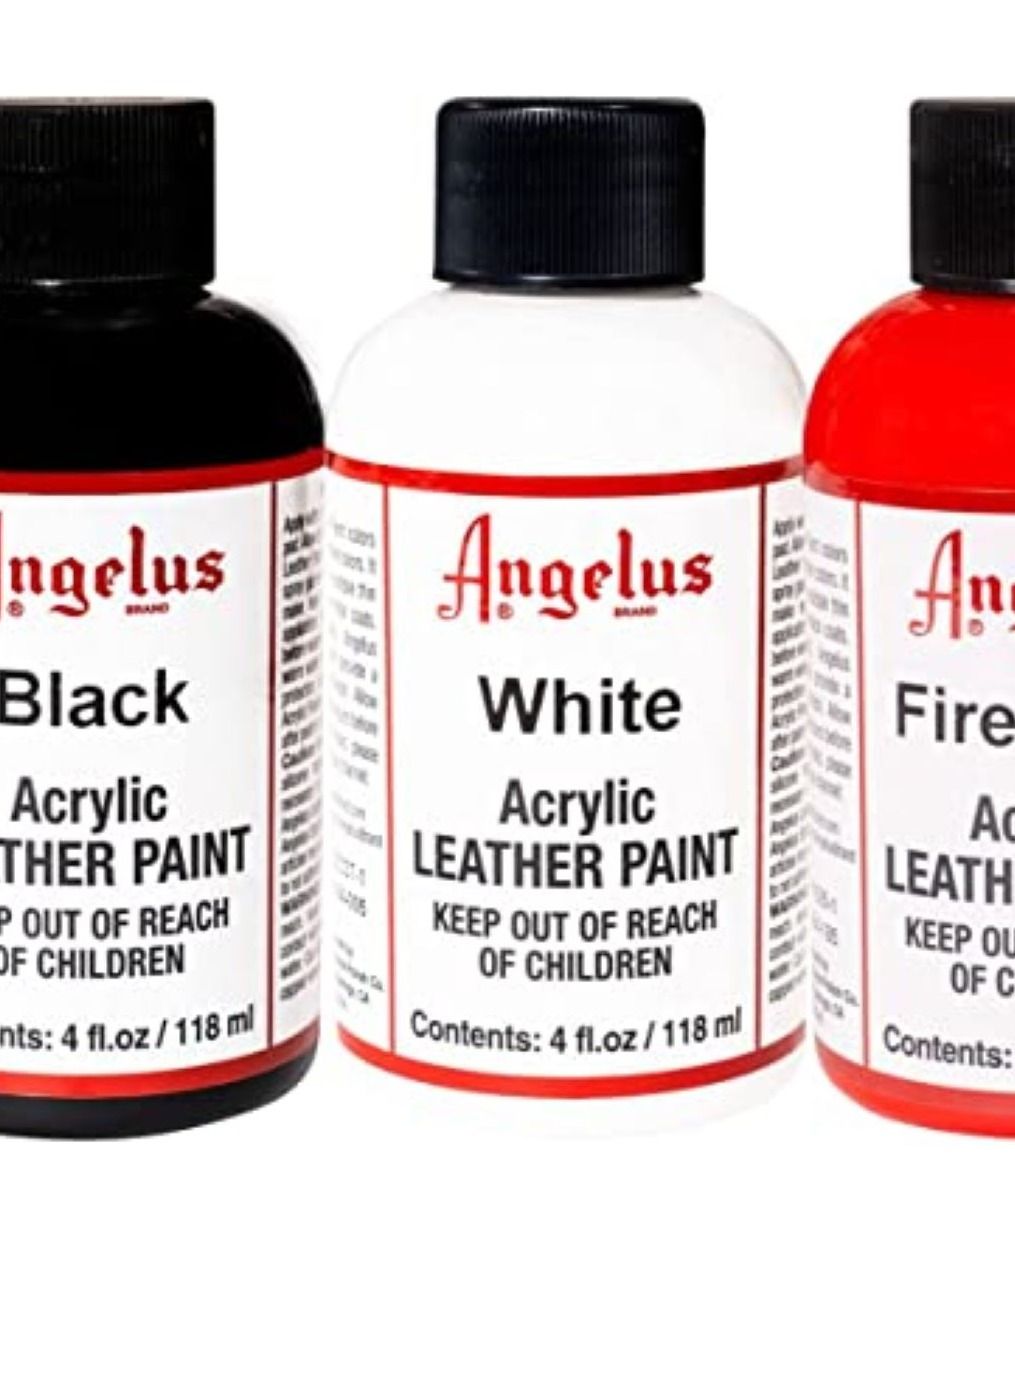 Angelus Brand Acrylic Leather Paint Matte Finisher No. 620 - 4oz - 2 Pack 